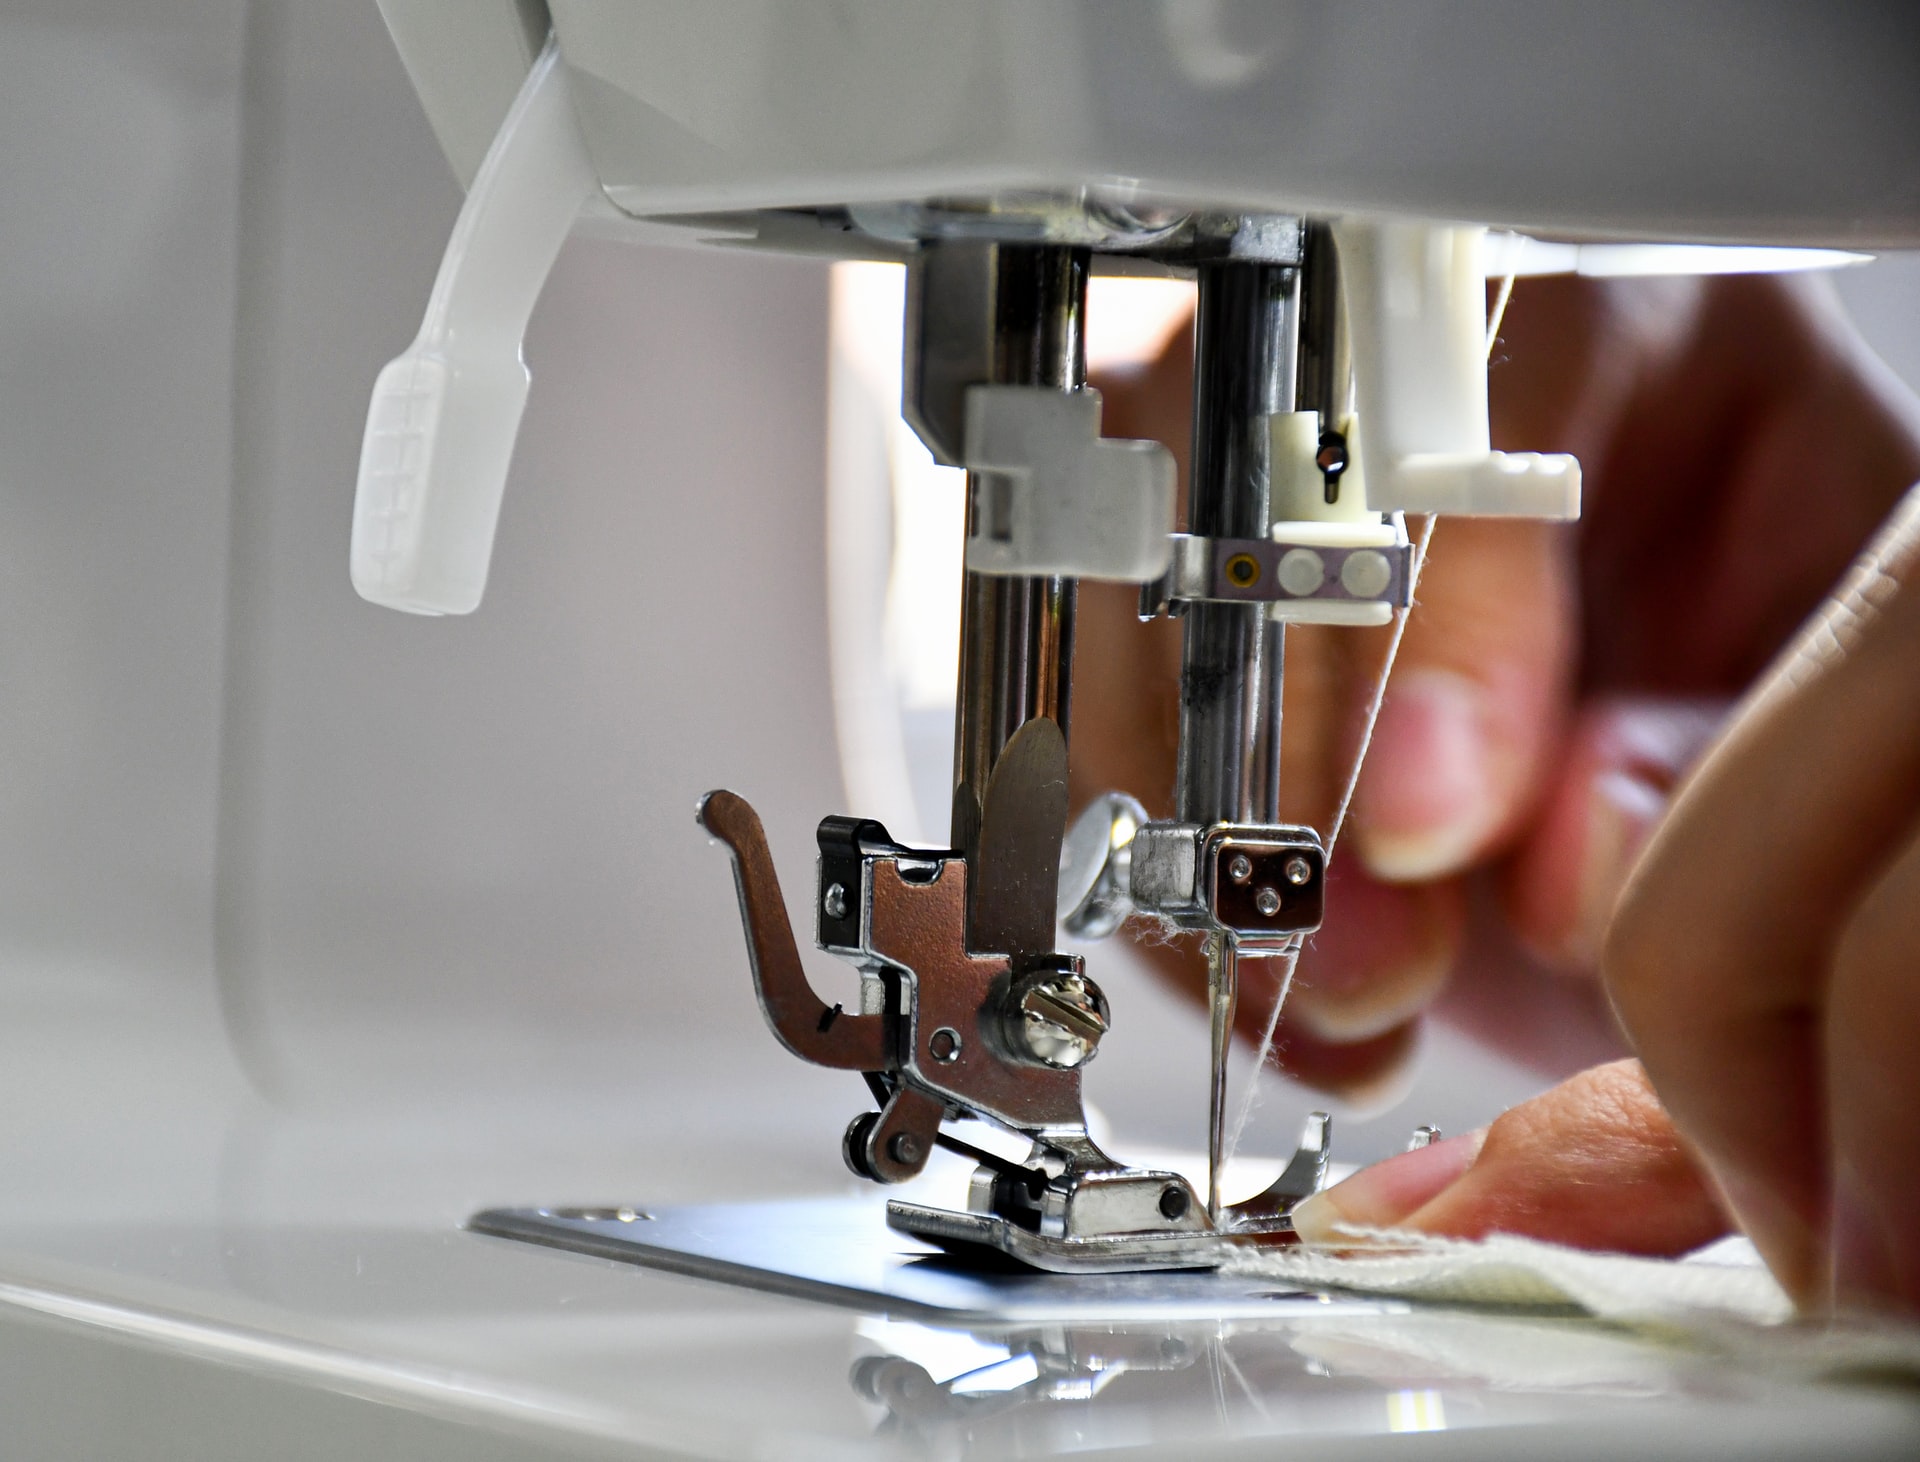 Sewing machine and overlock – are they useful at home?